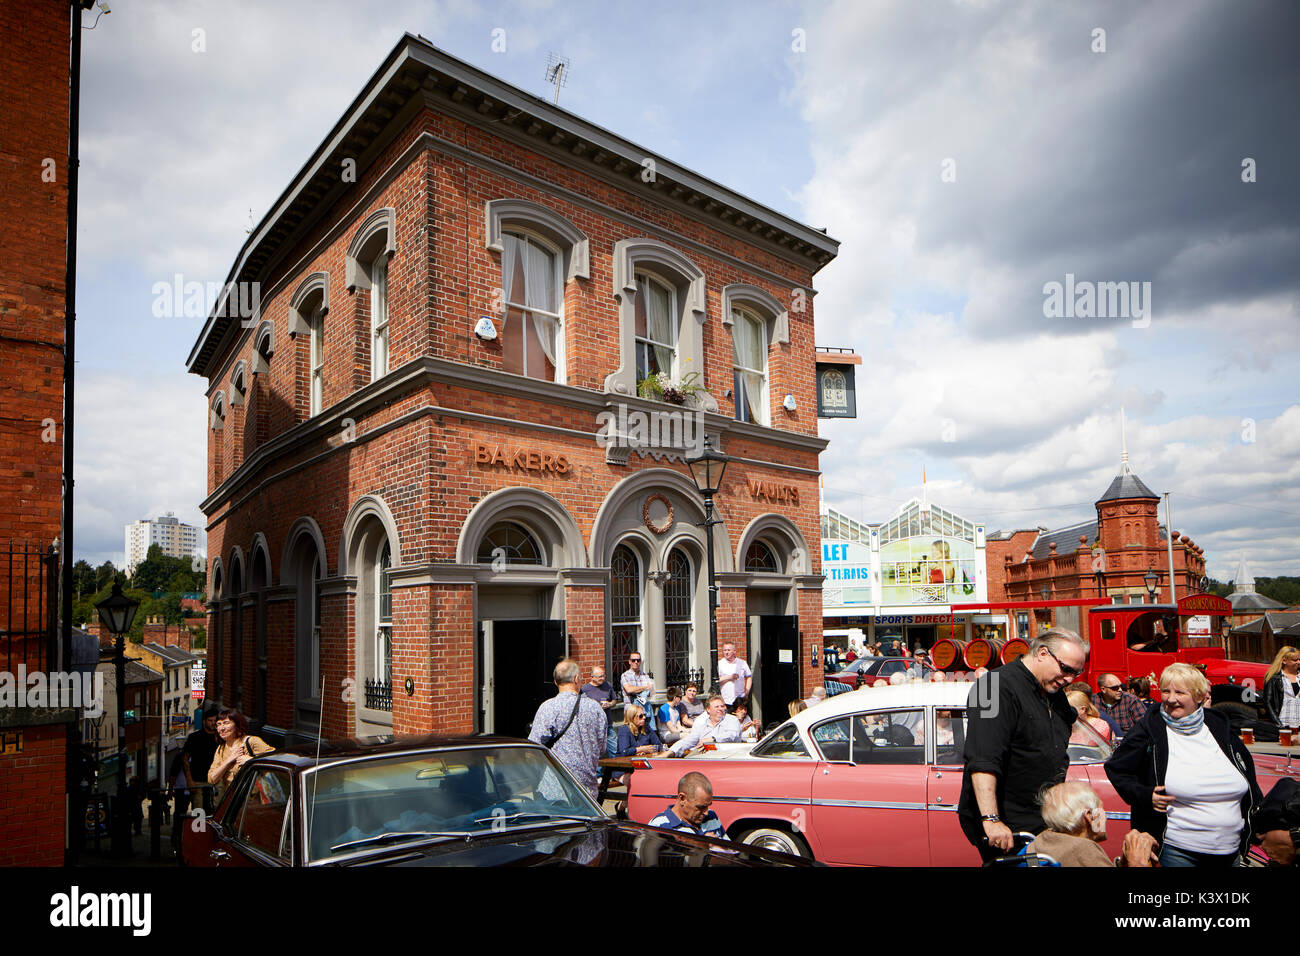 Landmark Stockport Town Centre Cheshire in gtr Manchester St Historic Robinsons Brewery Bakers Vault on the Market Brow with vintage car show Stock Photo